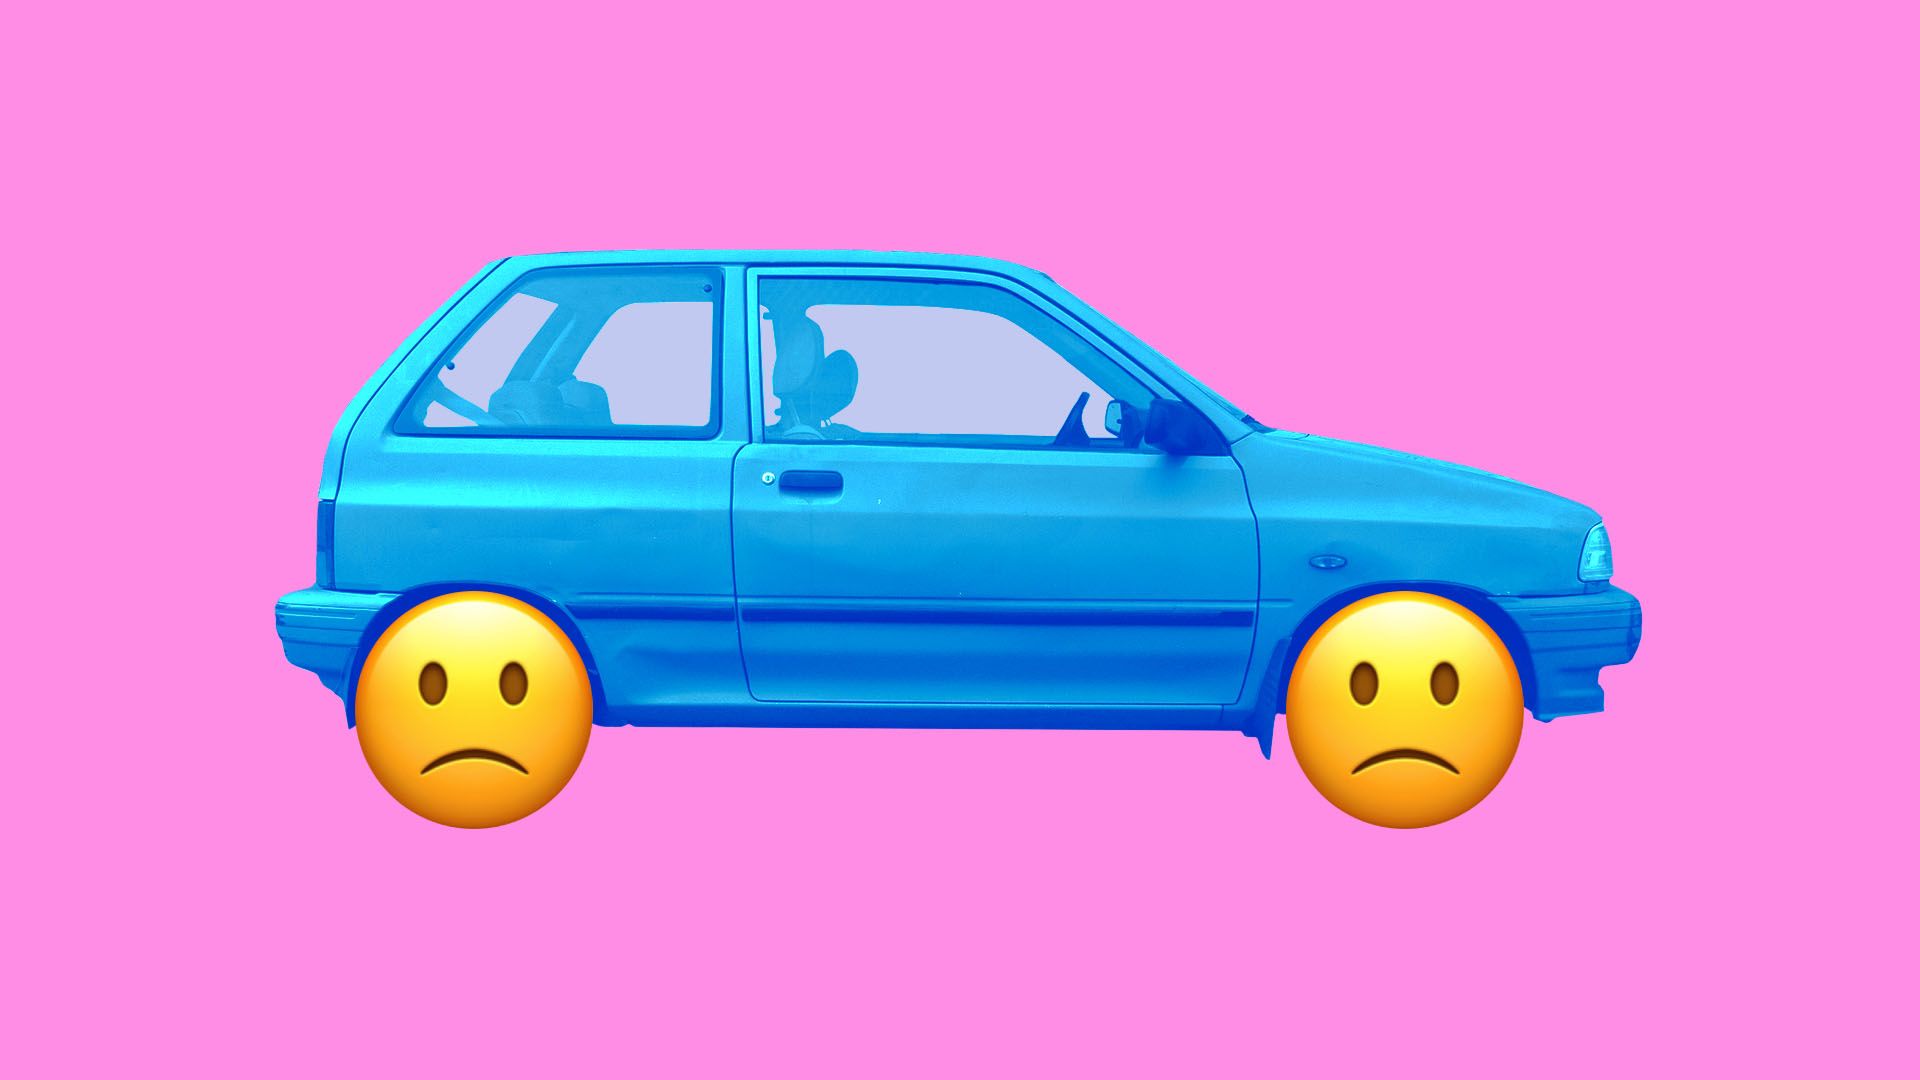 The front and back wheels of a blue car are frowning emoji faces in this illustration. 